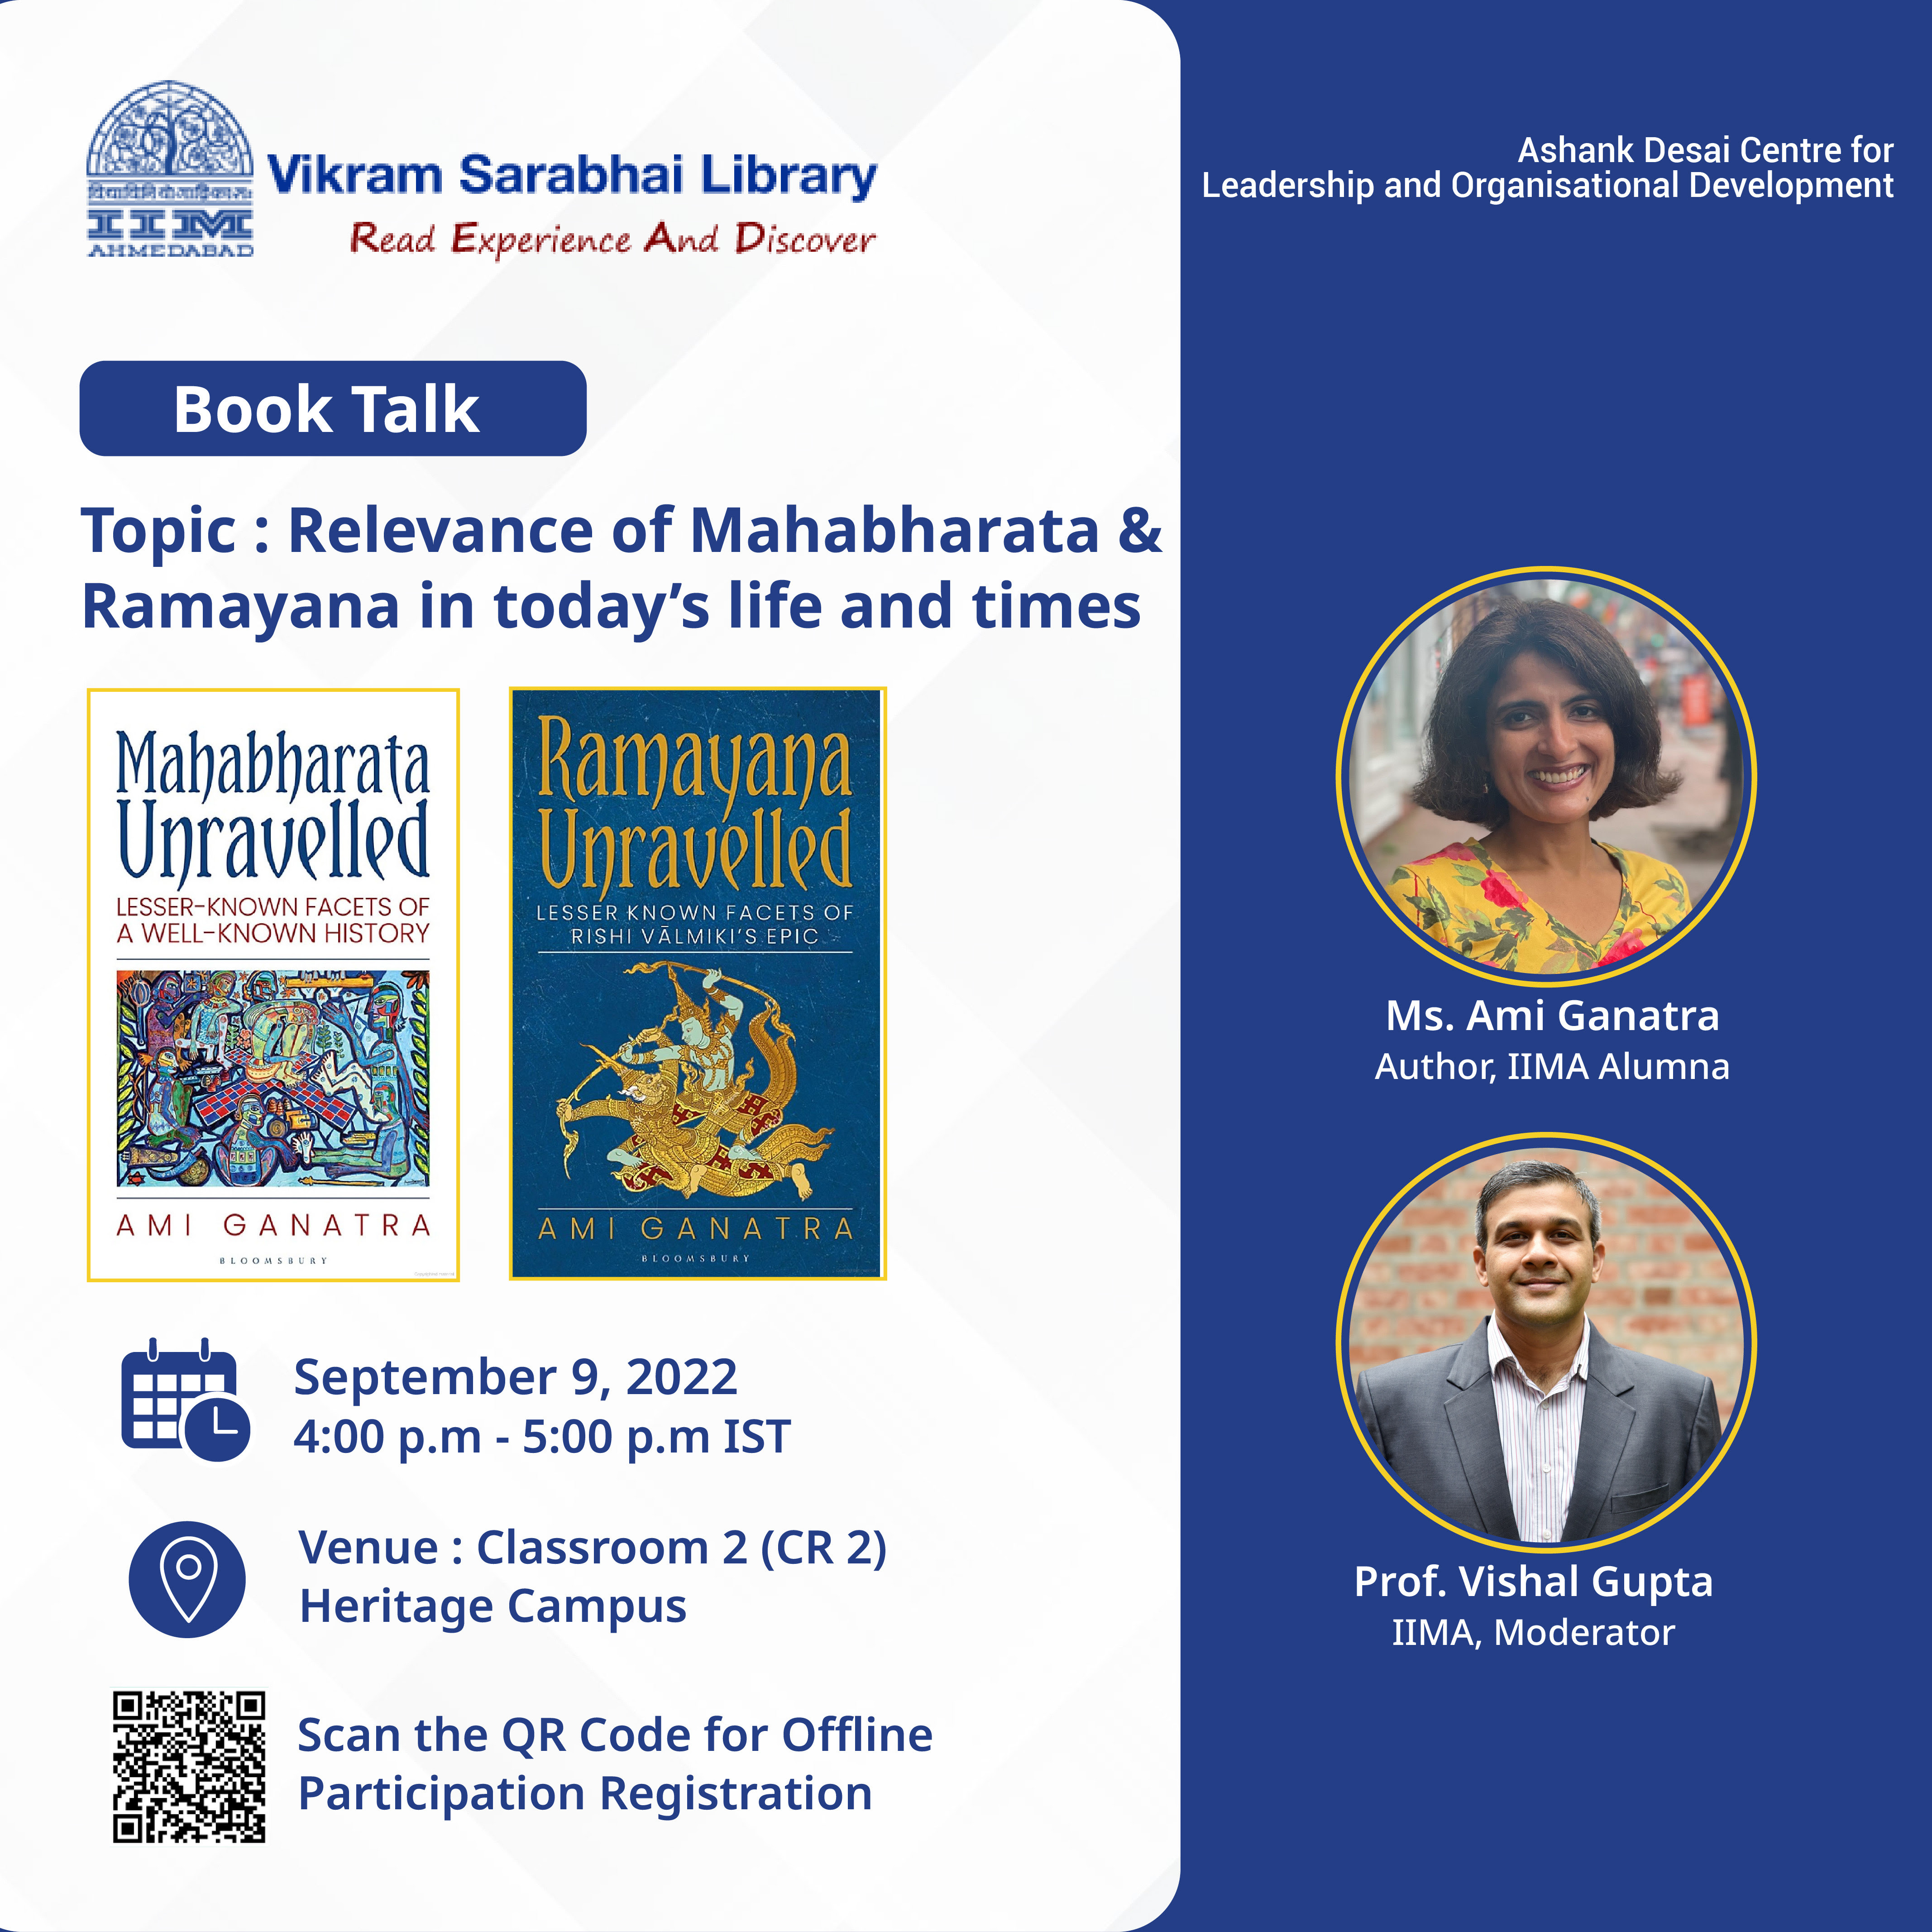 The Book Talk on “Relevance of Mahabharata & Ramayana in today’s life and times”